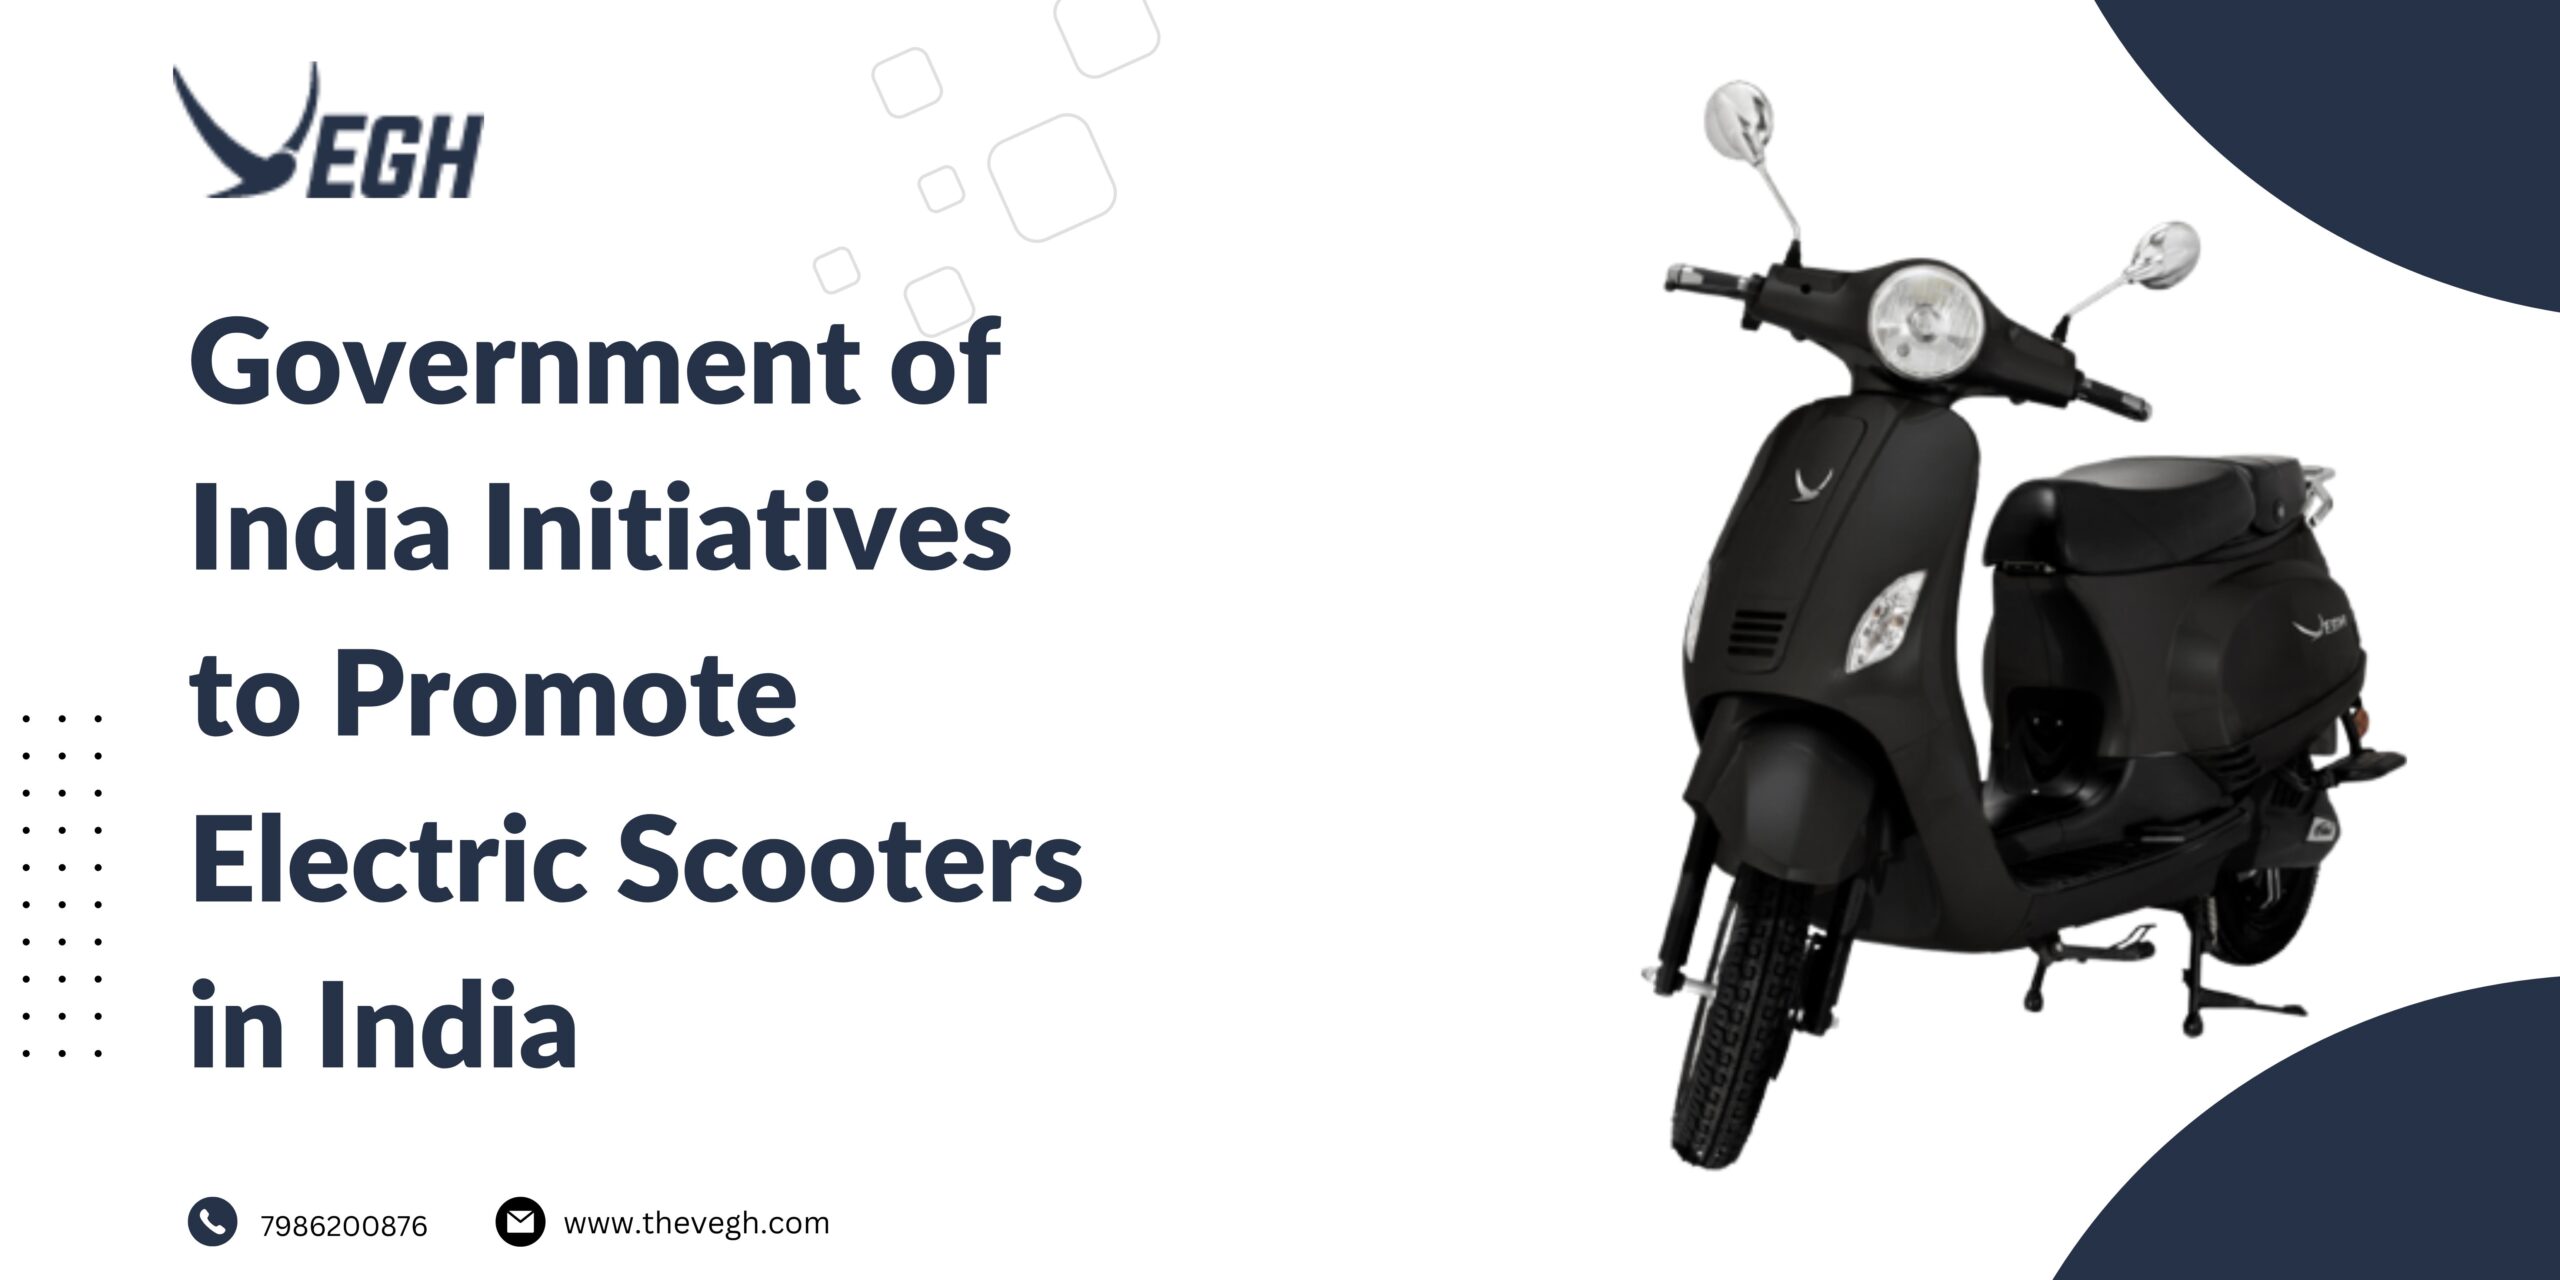 Government of India Initiatives to Promote Electric Scooters in India